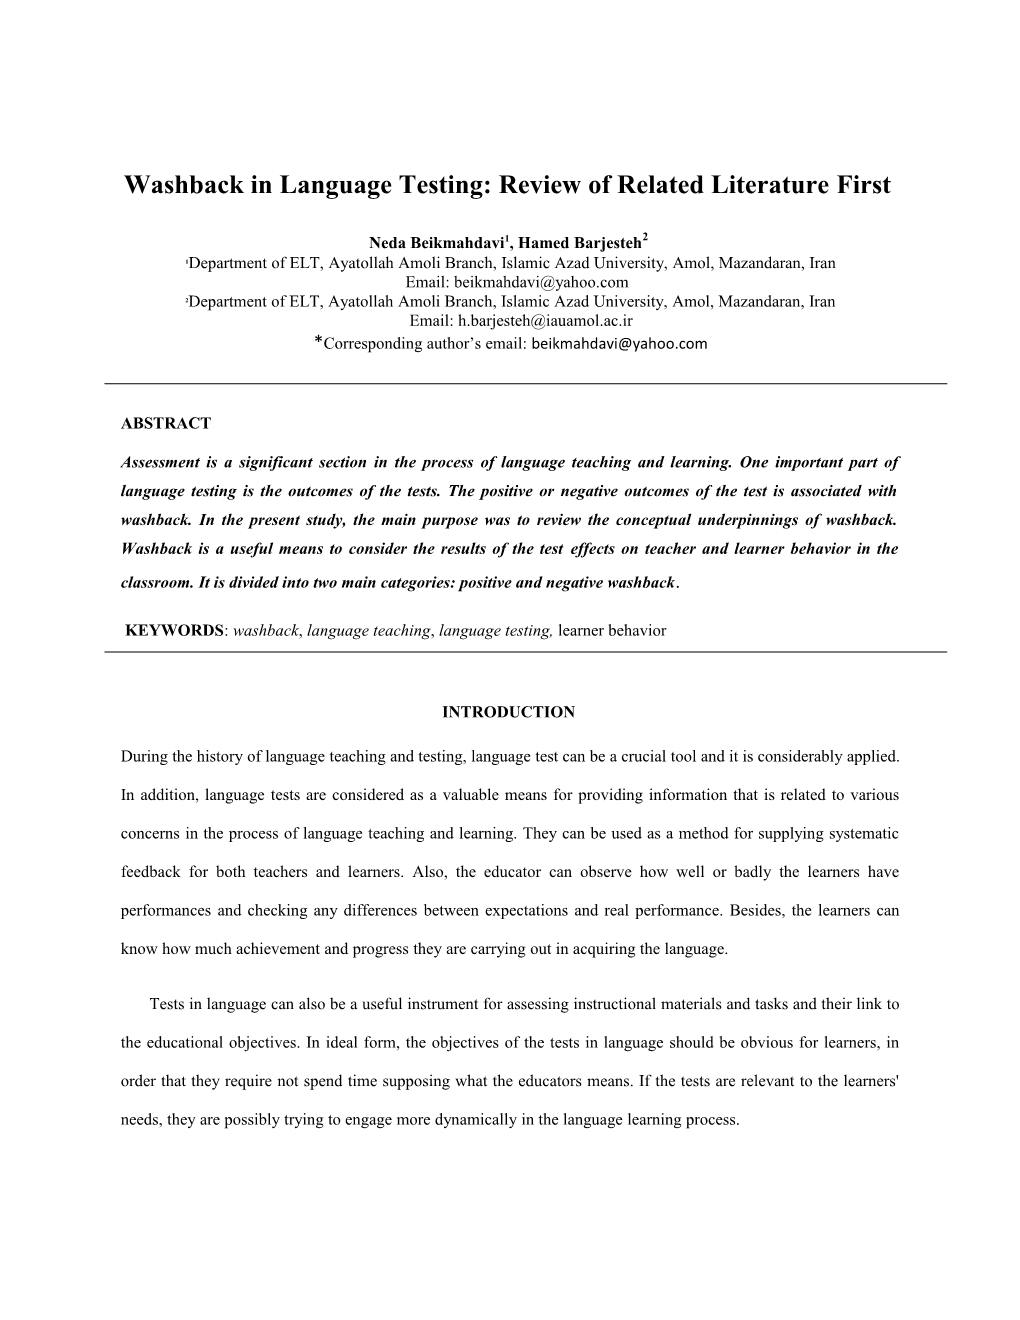 Washback in Language Testing: Review of Related Literature First